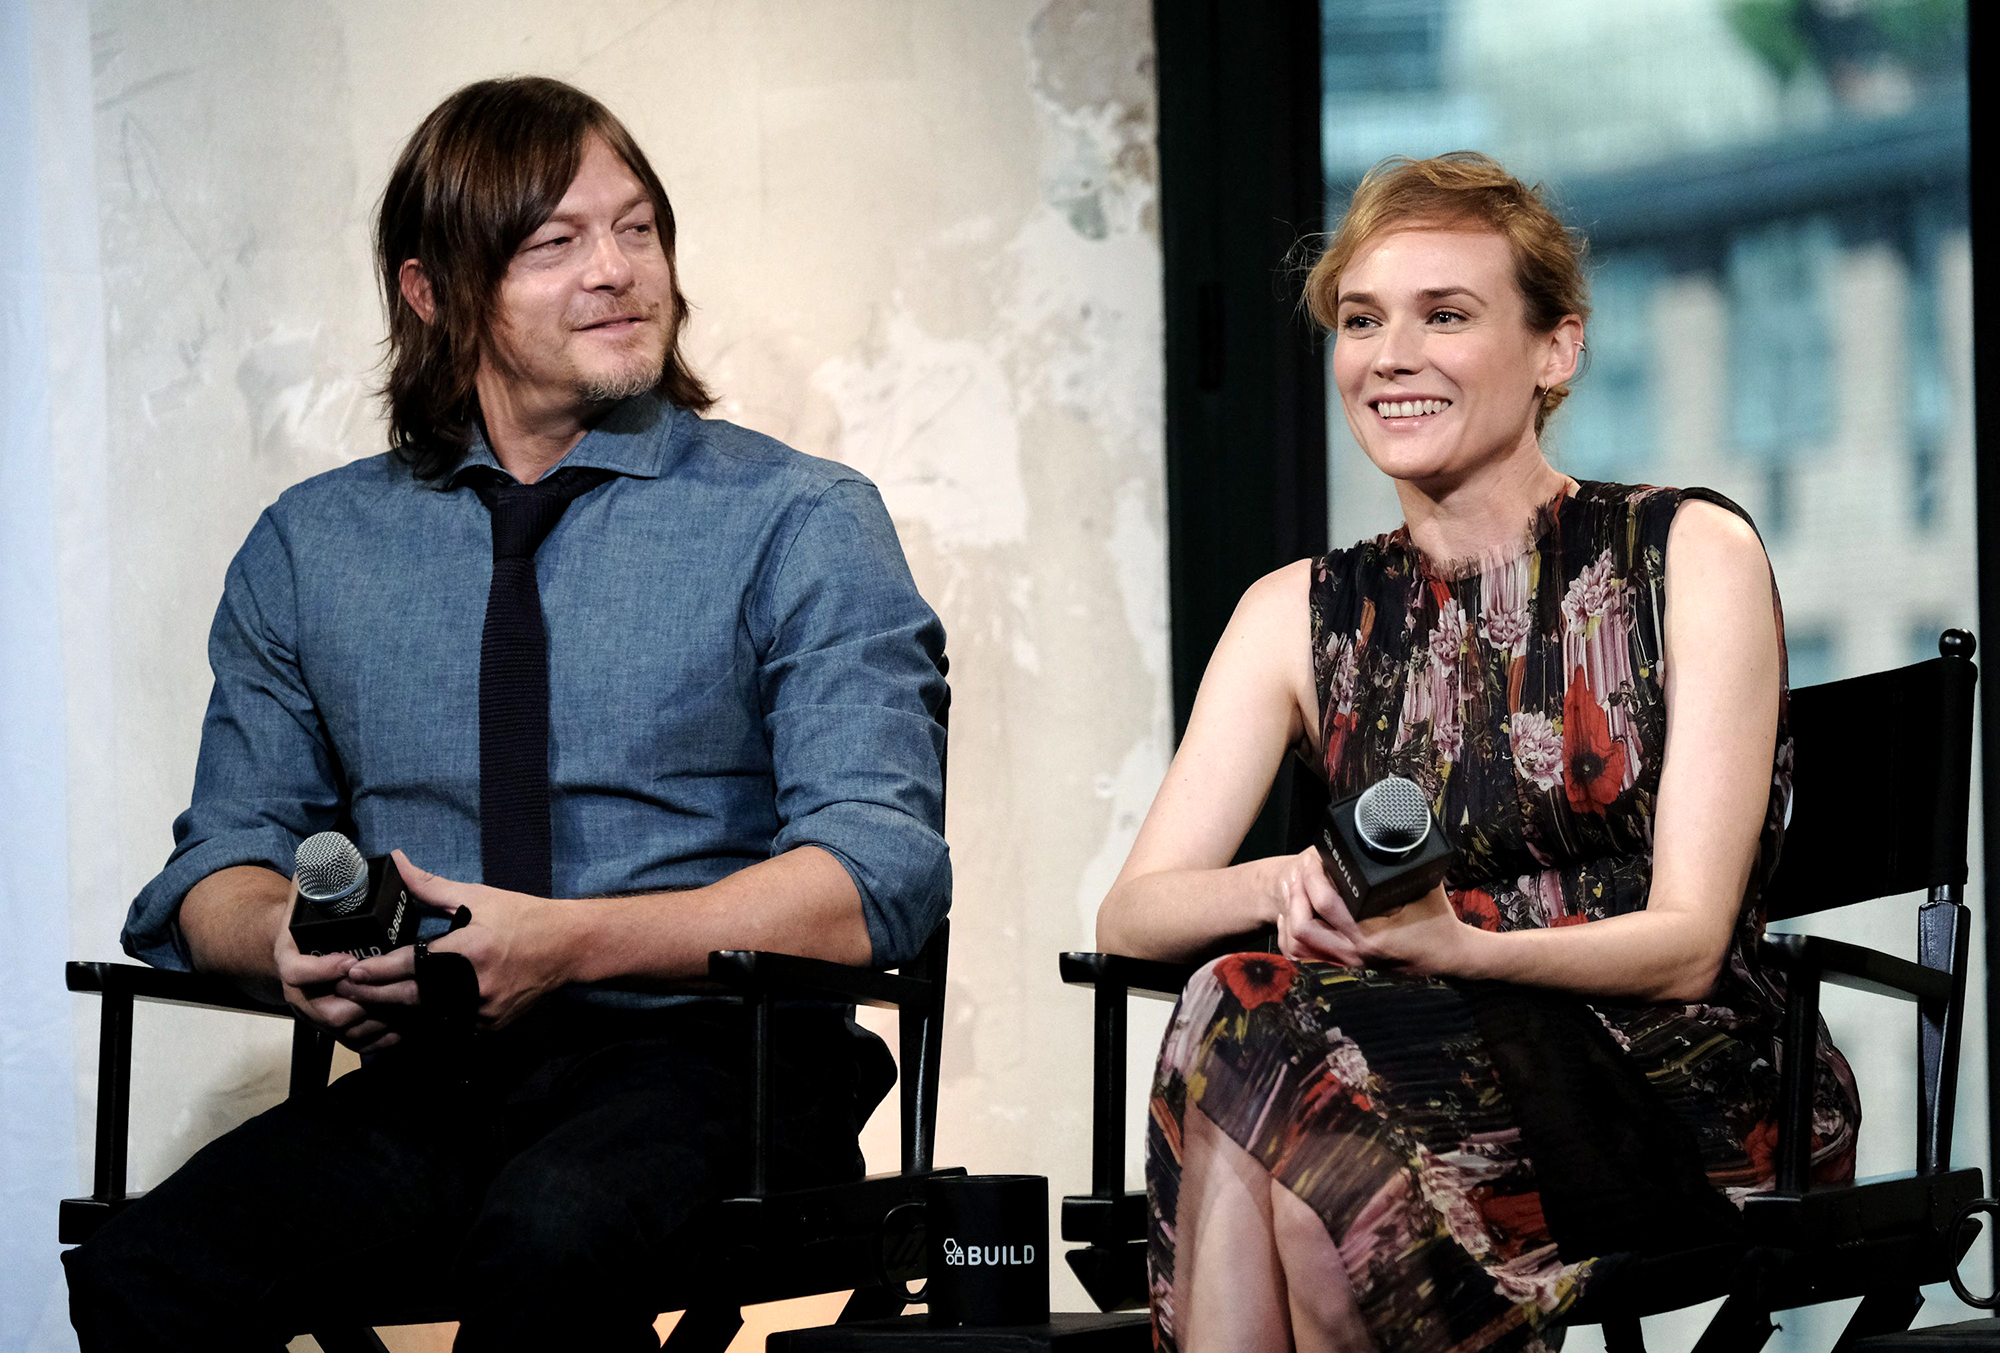 Norman Reedus gets lovey with Diane Kruger and more star snaps